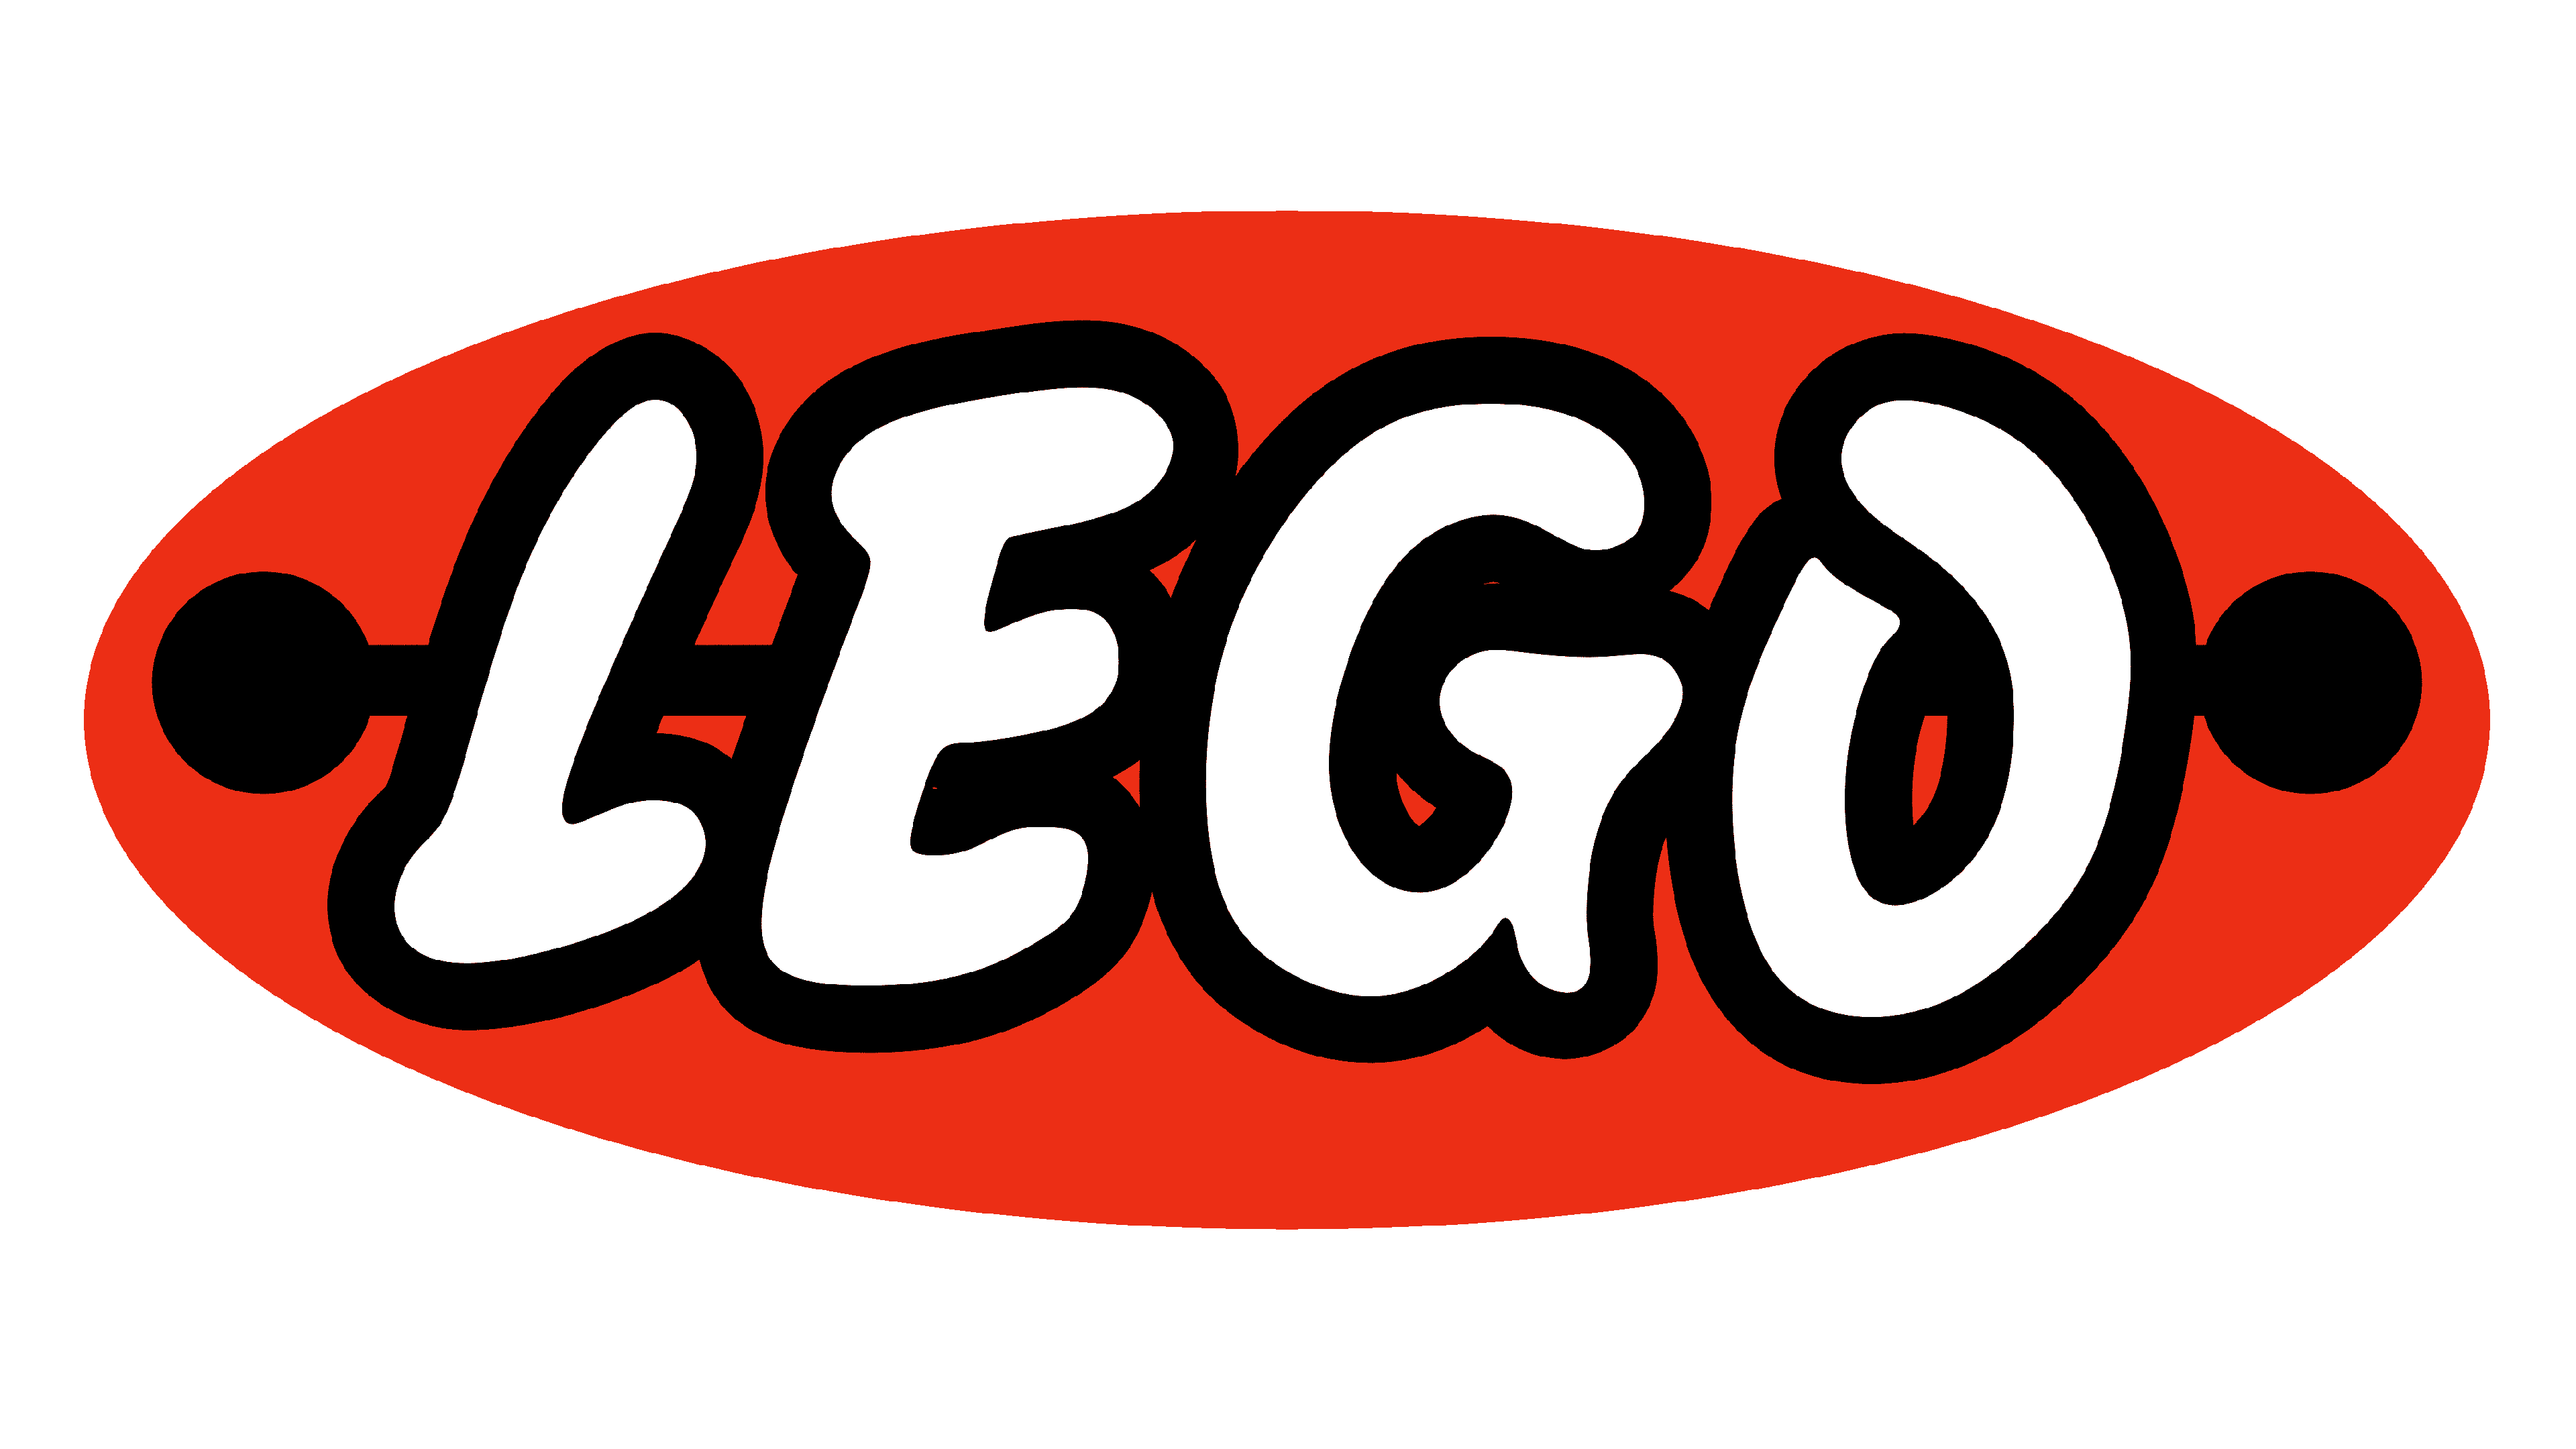 Lego Logo and meaning, history, brand